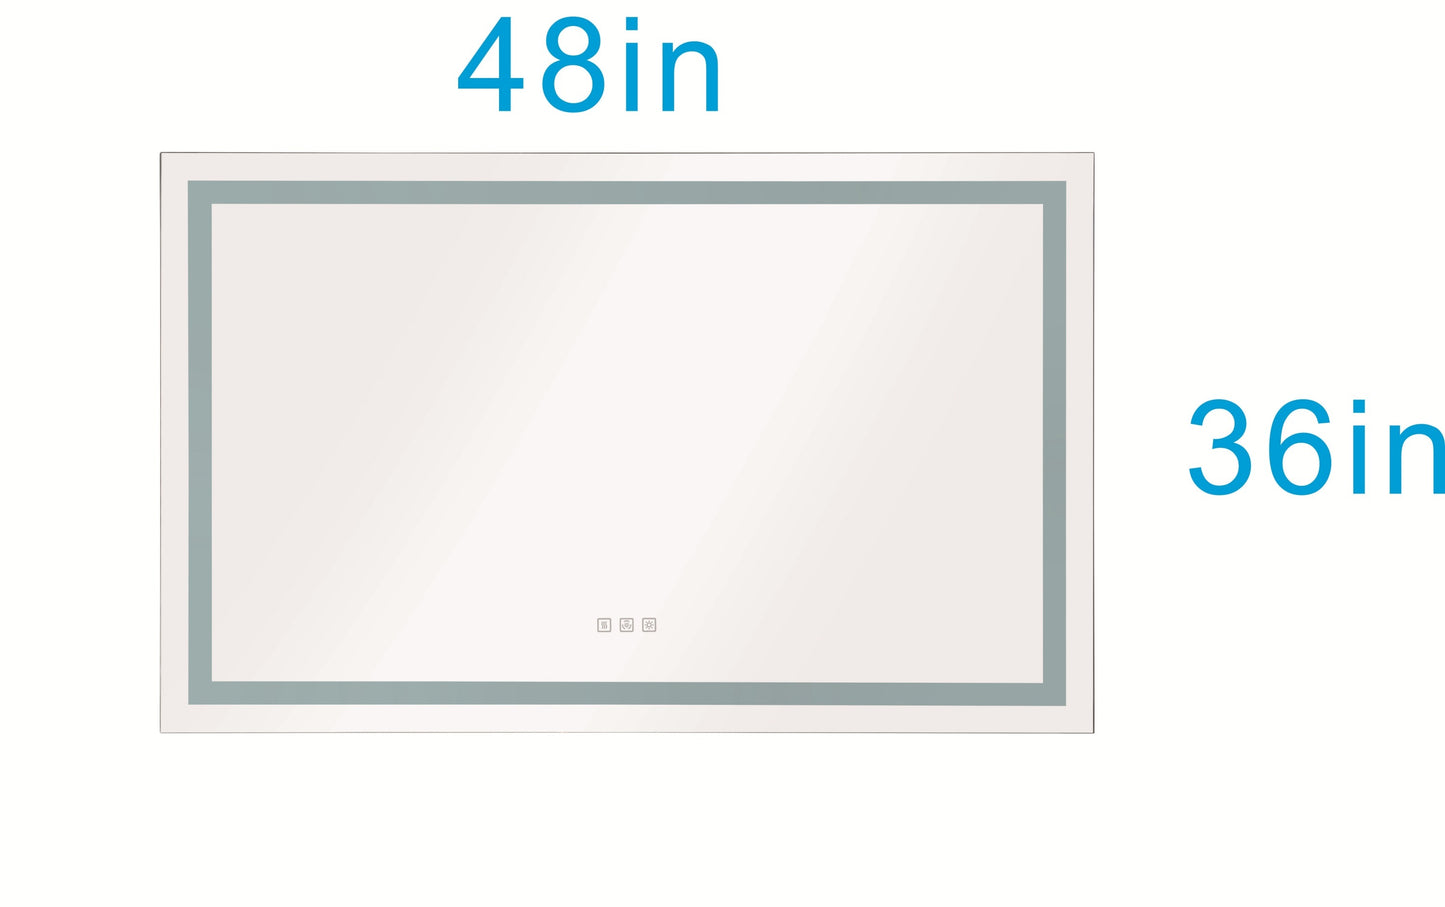 48*36 LED Lighted Bathroom Wall Mounted Mirror with High Lumen+Anti-Fog Separately Control+Dimmer Function